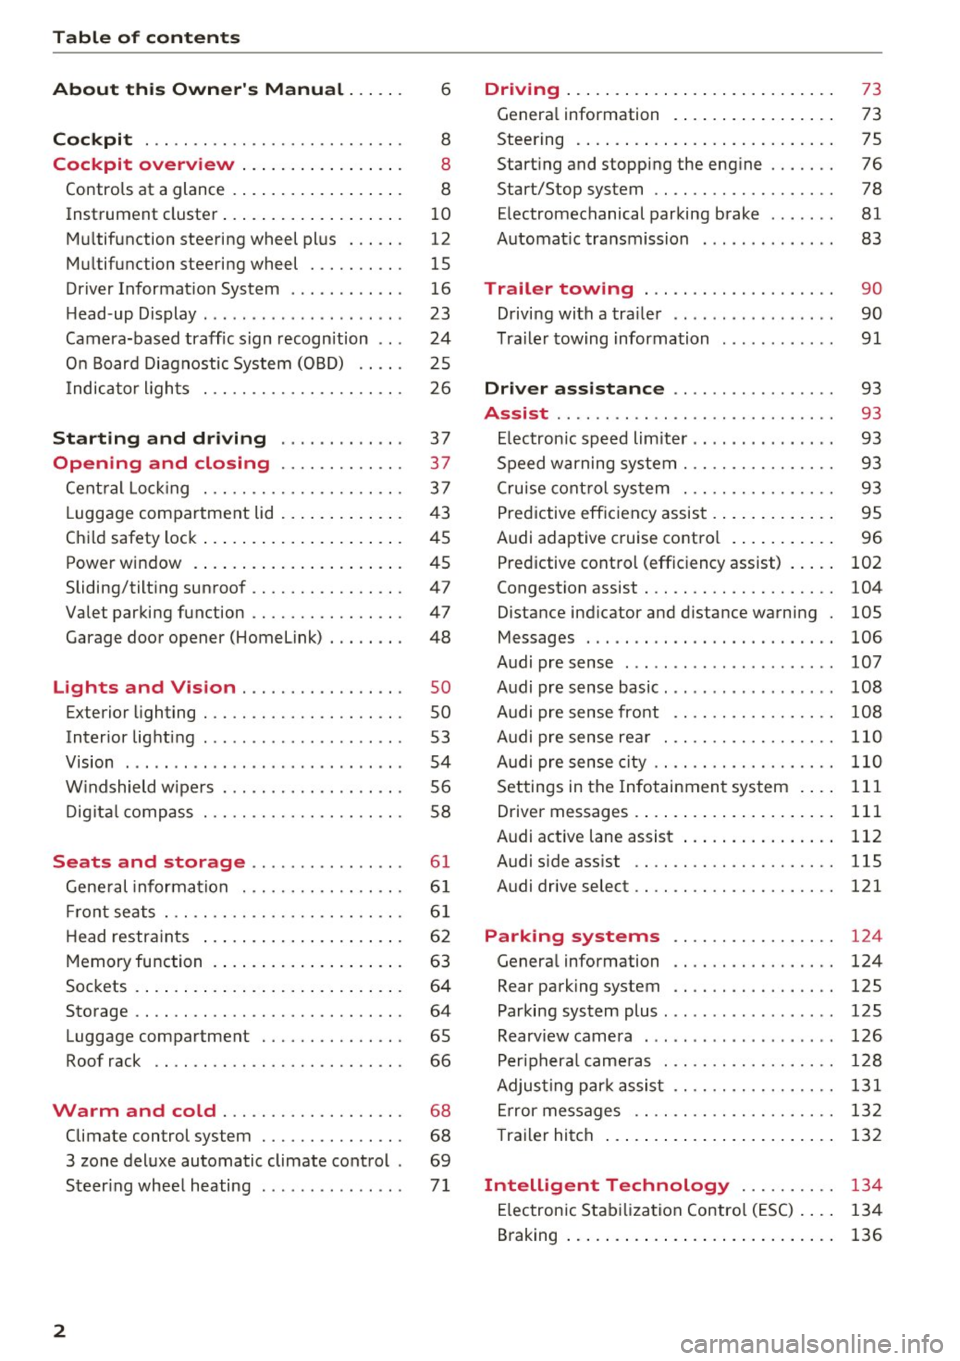 AUDI S4 2017  Owners Manual Table  of  contents 
About  this  Owners  Manual  ... .. . 
Cockpit  ... .. ............... .... ..  . 
Cockpit  overview  ................ . 
Controls  at  a glance  ... .......... .. .. . 
Instrume